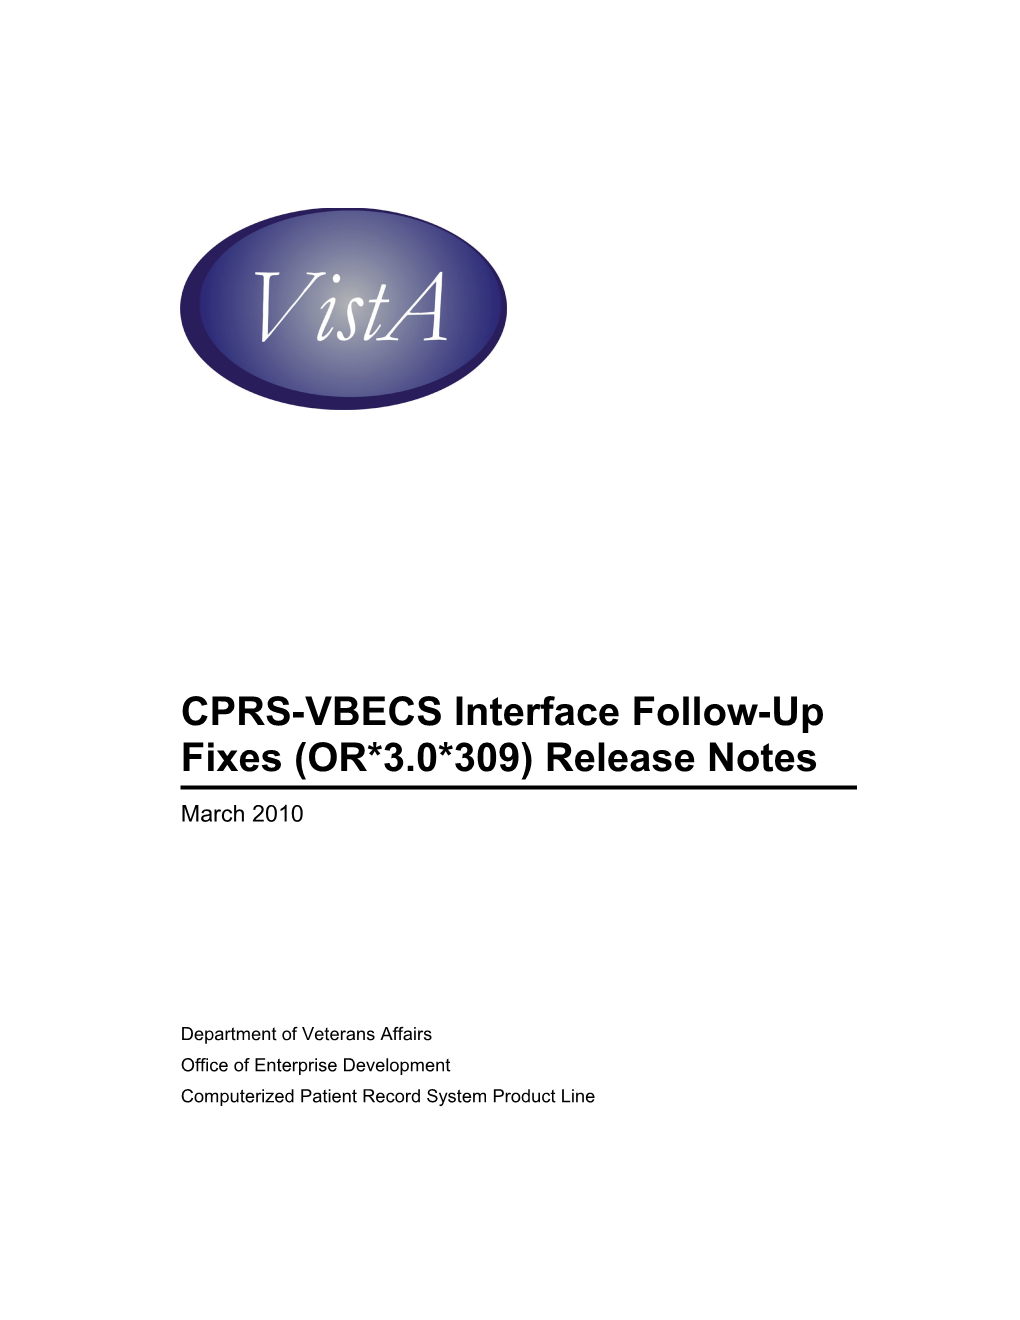 CPRS-VBECS Interface Follow-Up Fixes (OR*3.0*309) Release Notes